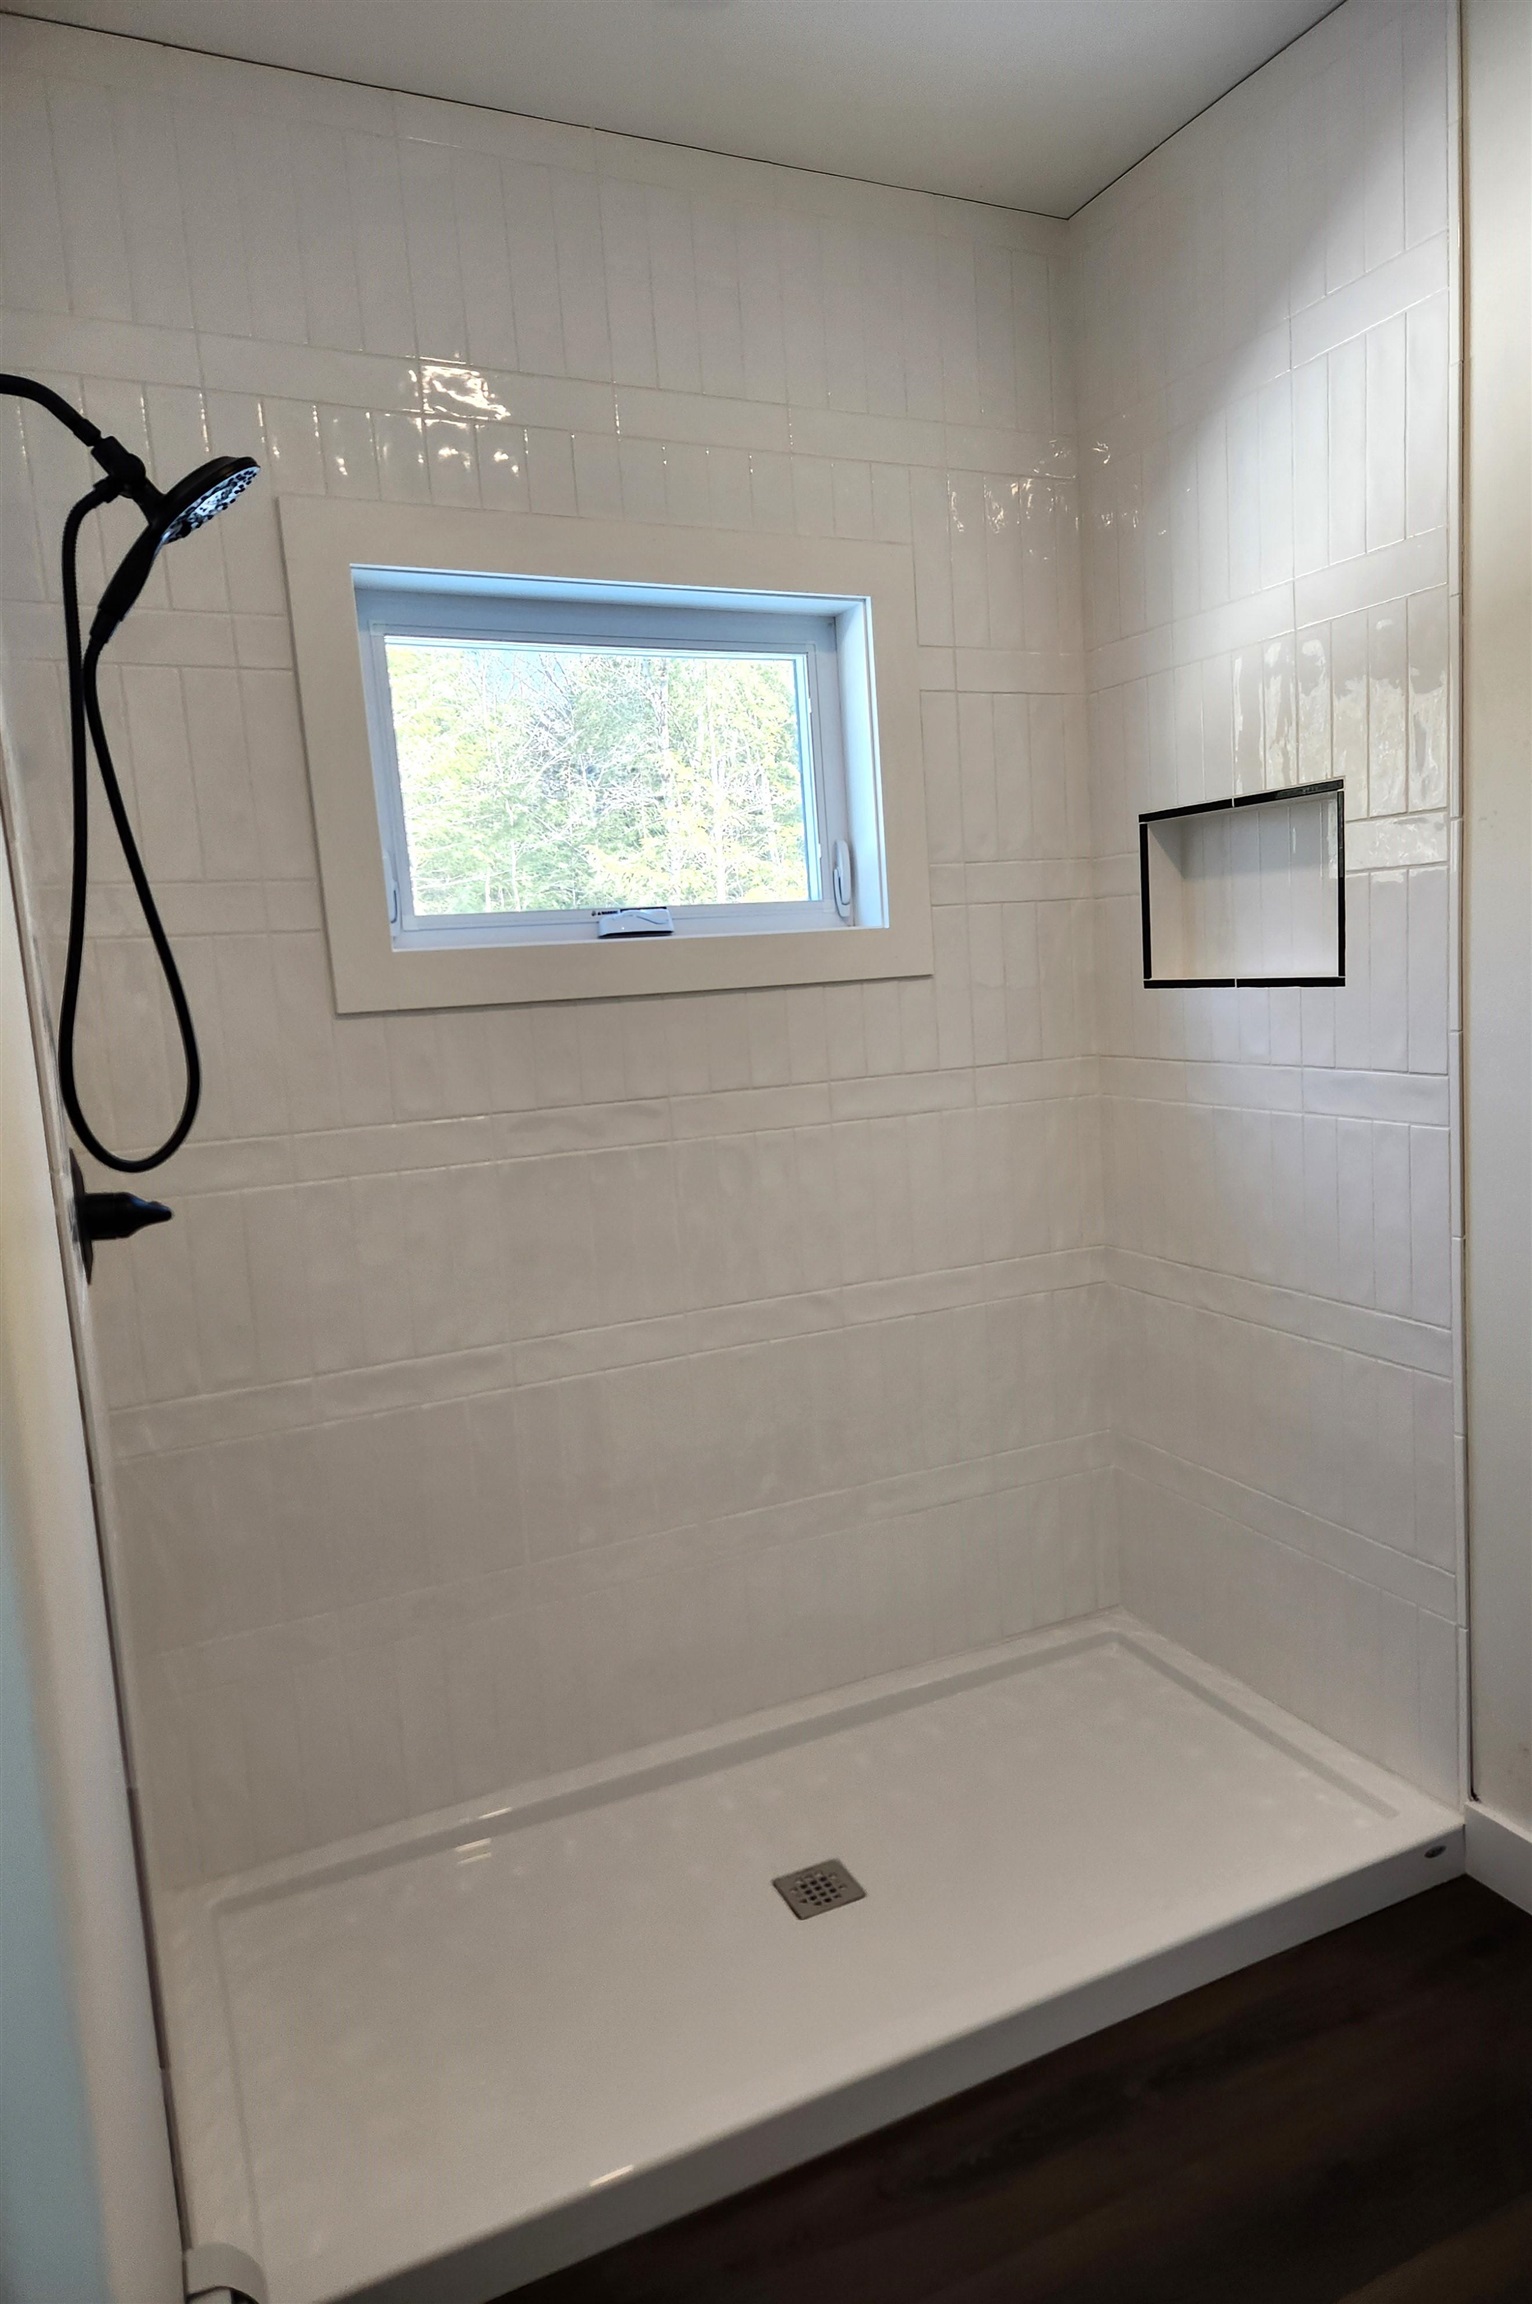 Example of tile shower main bath